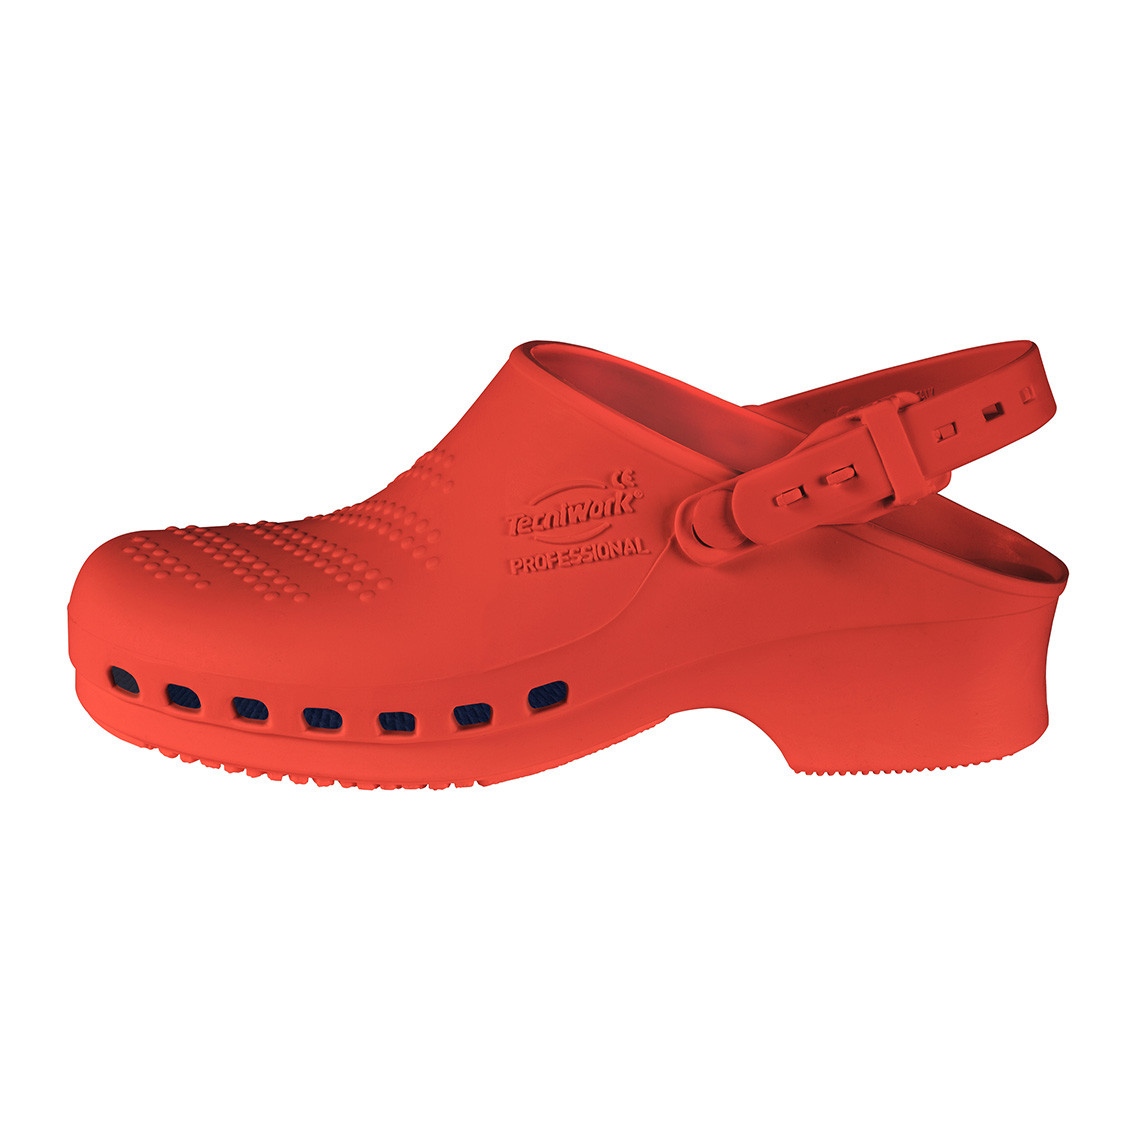 Professional sanitary clogs red Size 37/38